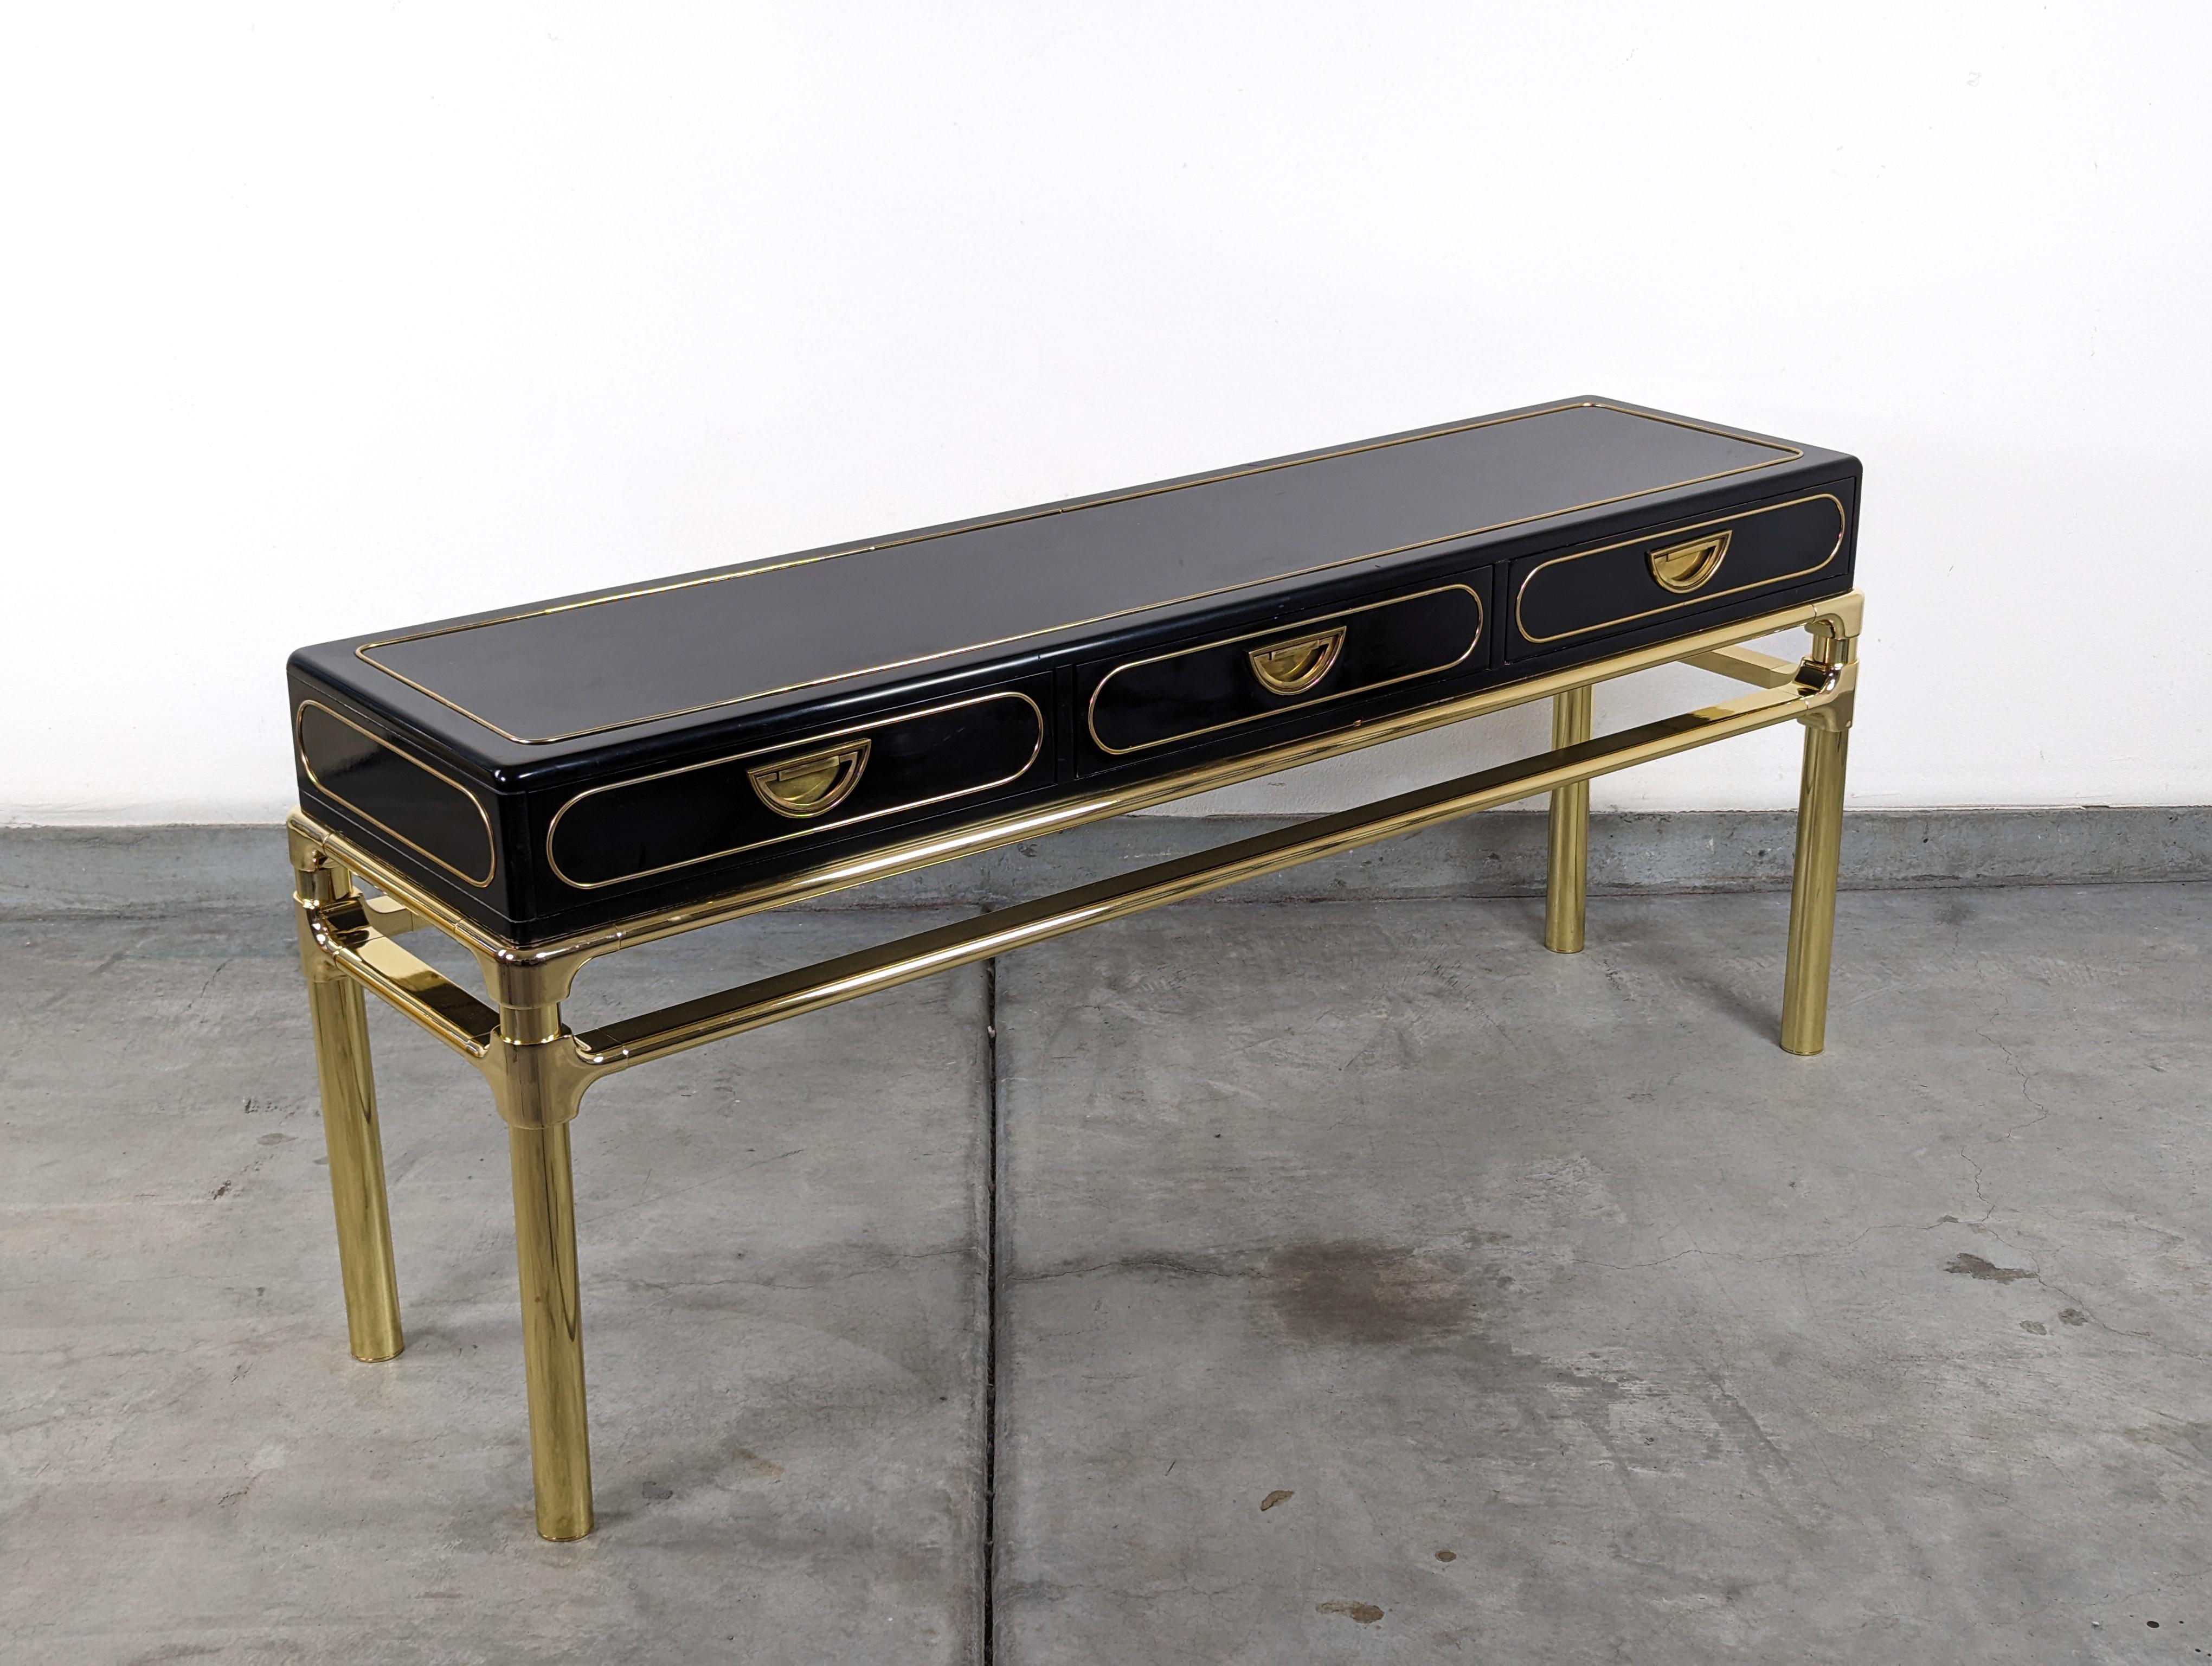 Brass and Black Lacquer Console Table With Drawers by Mastercraft, c1970s For Sale 3